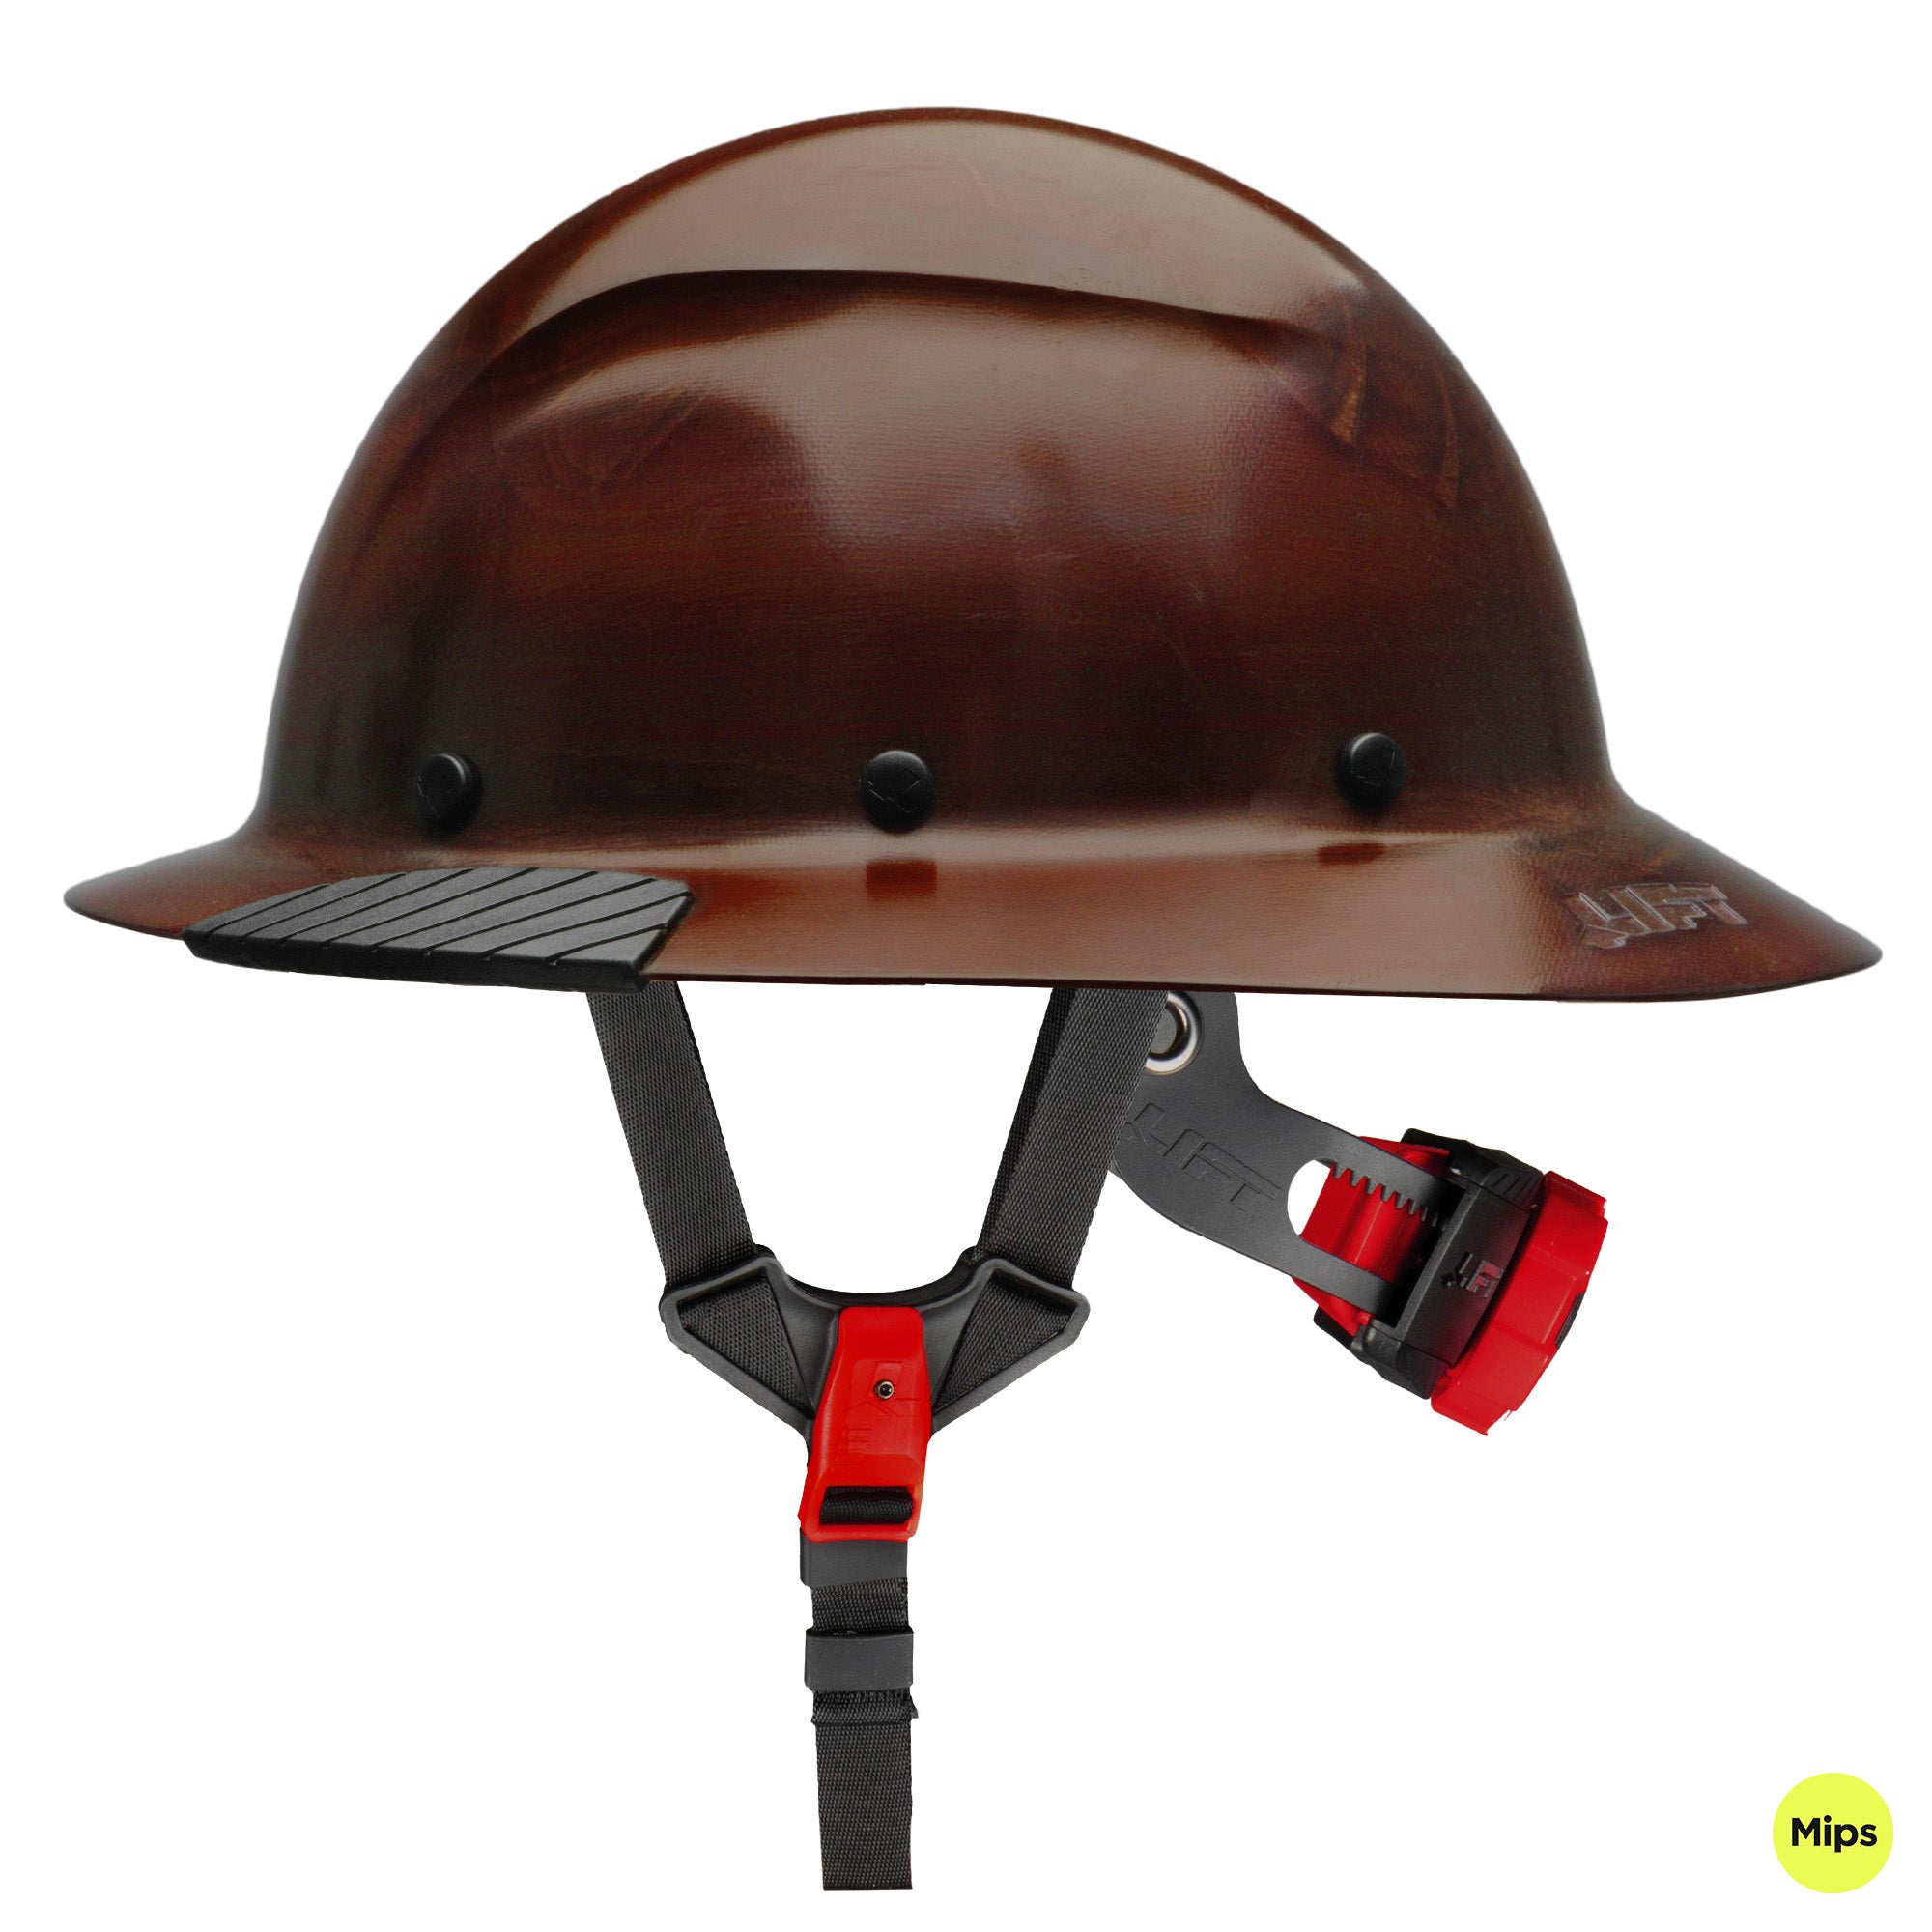 DAX Full Brim Hard Hat with Mips - Natural